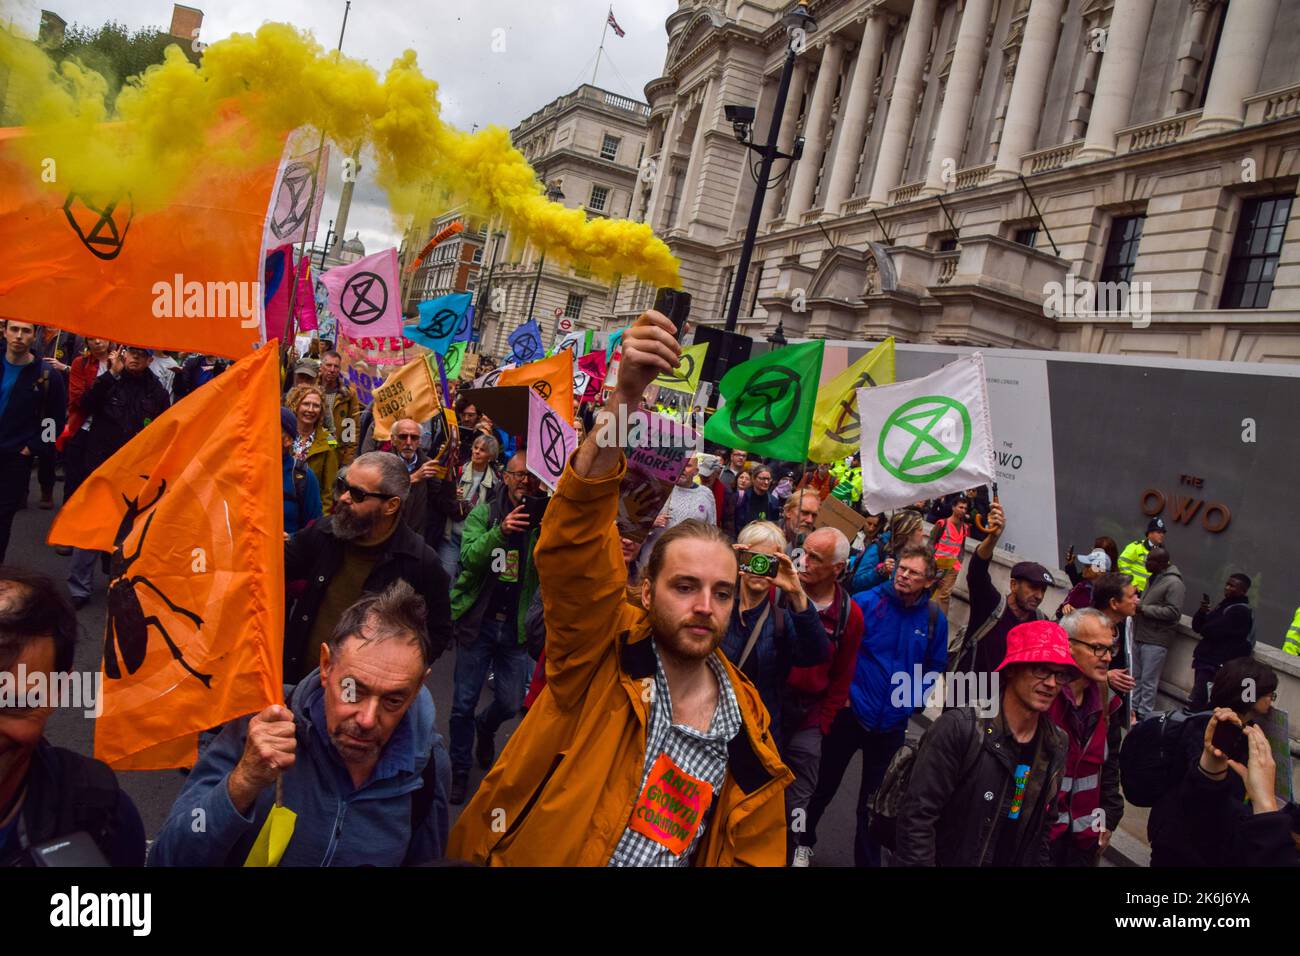 London, UK. 14th October 2022. Protesters march in Whitehall. Extinction Rebellion protesters gathered in Westminster demanding action on the climate crisis and skyrocketing energy bills. Credit: Vuk Valcic/Alamy Live News Stock Photo